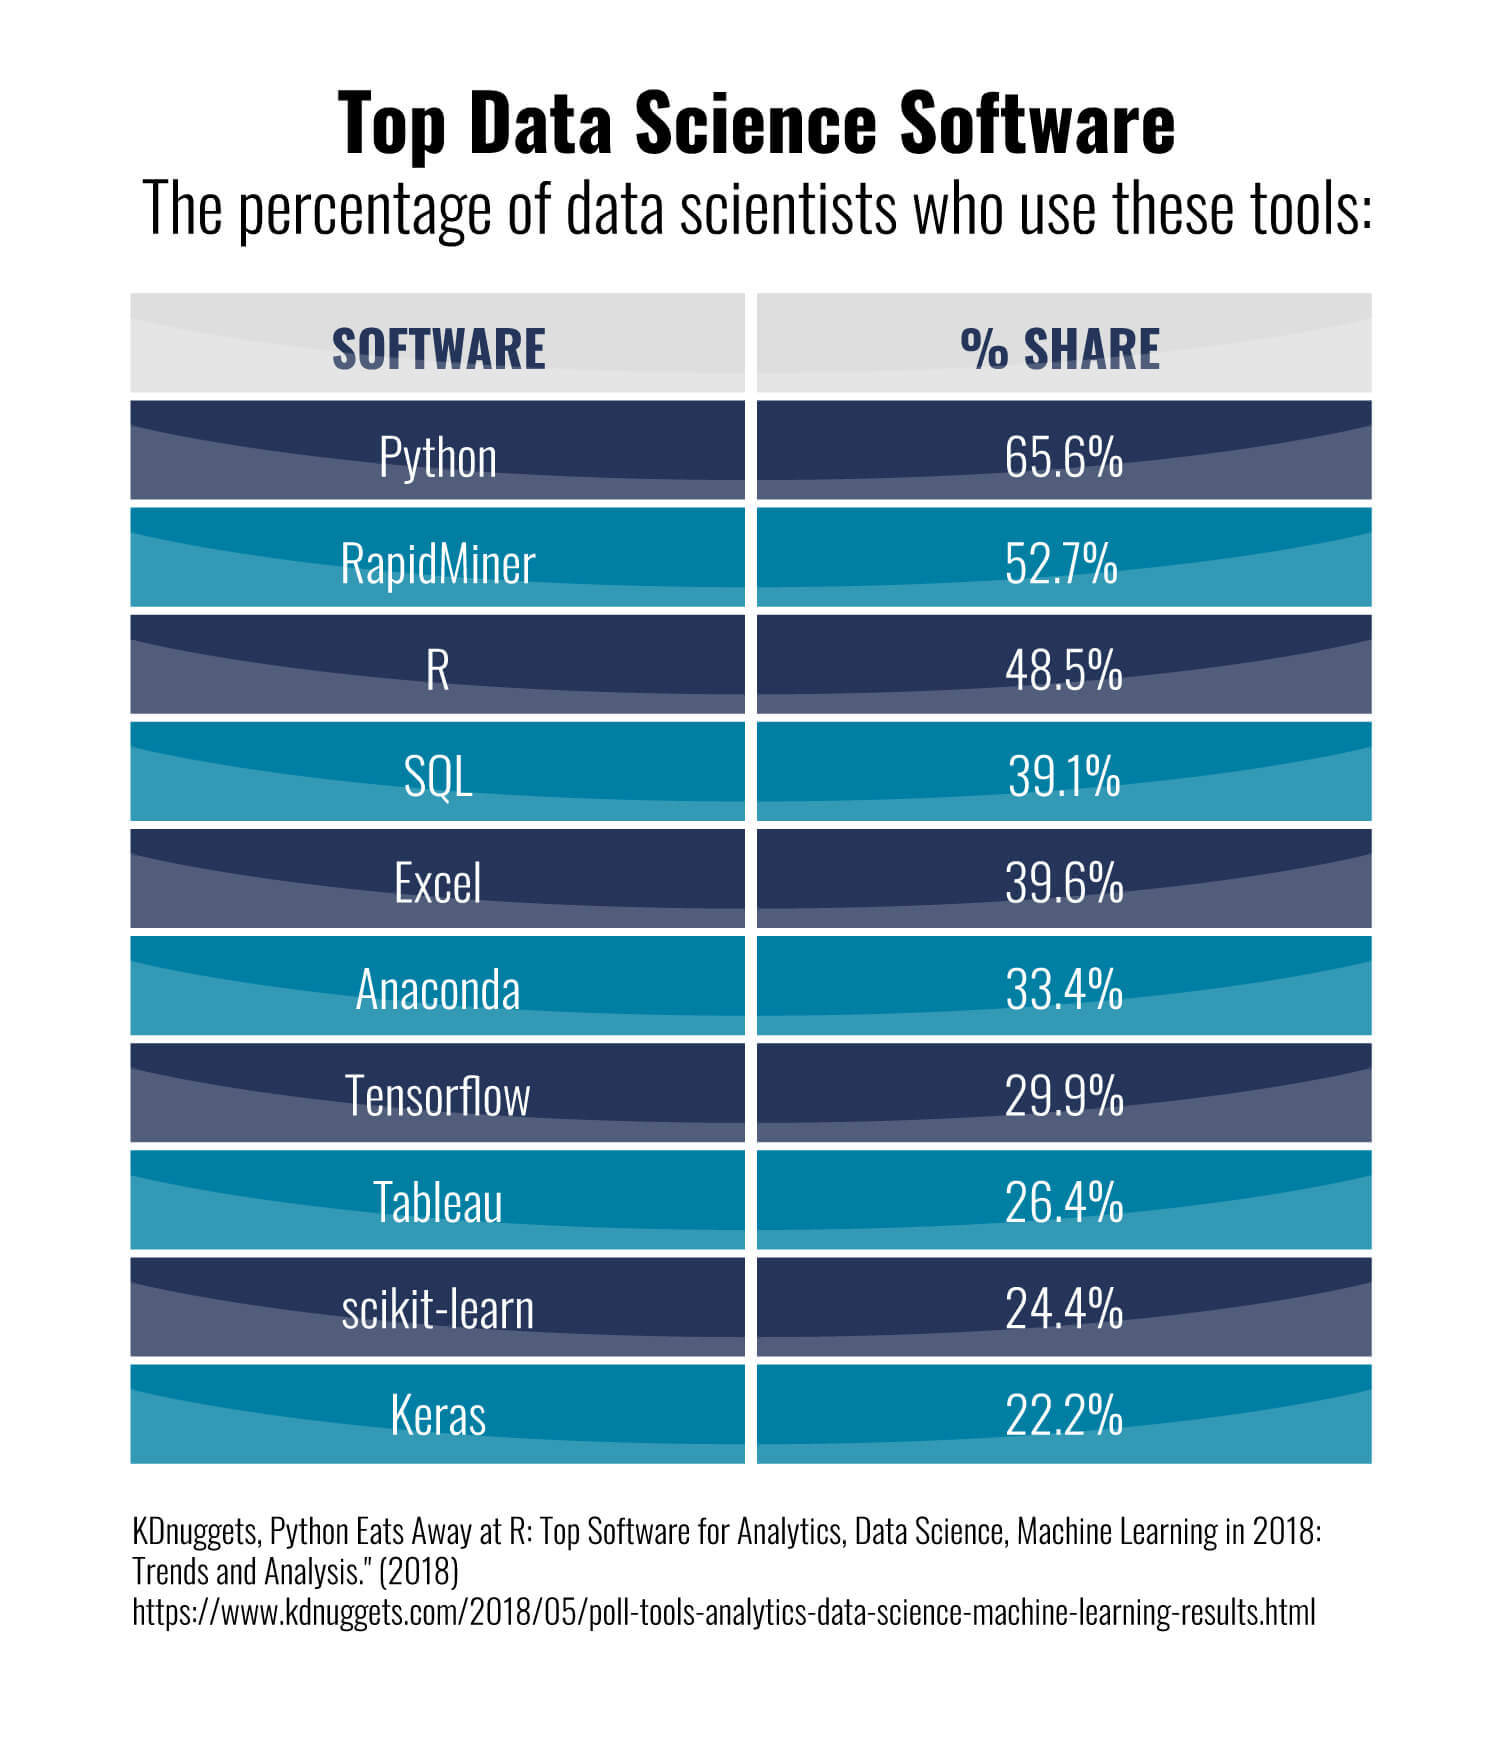 The percentage of data scientists who use different software